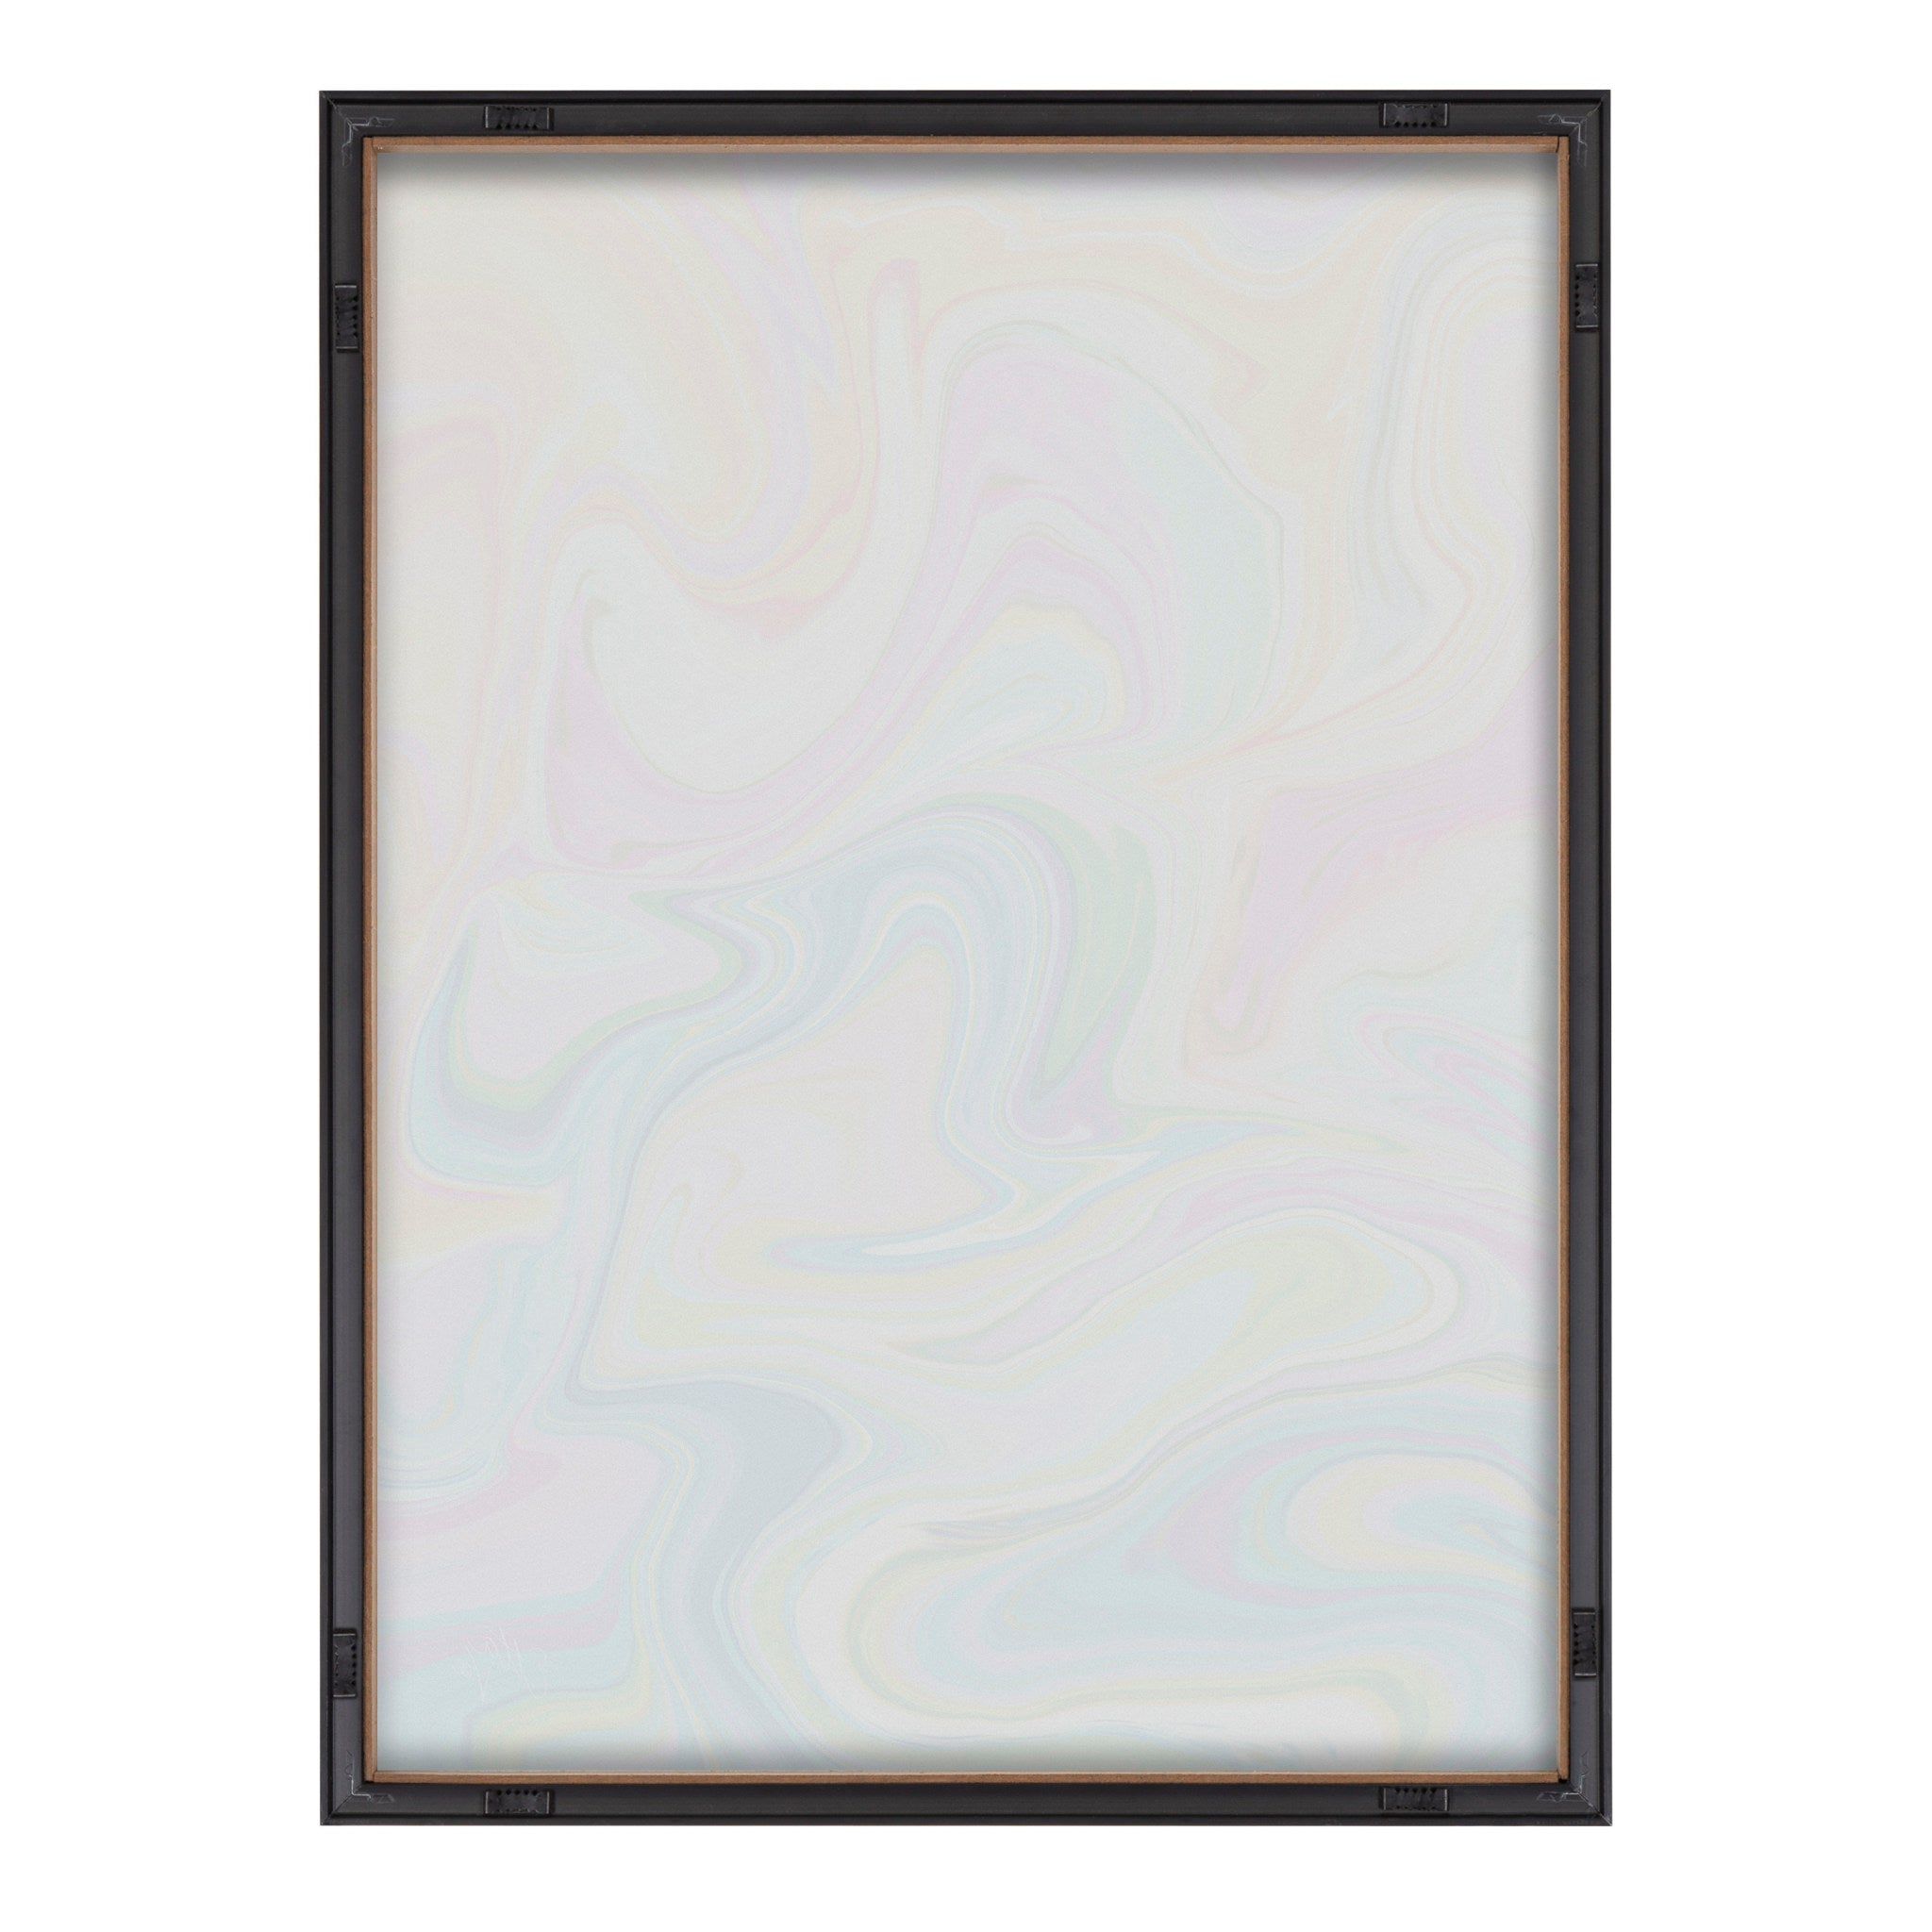 Blake Marble 27 Framed Printed Glass by Jessi Raulet of Ettavee